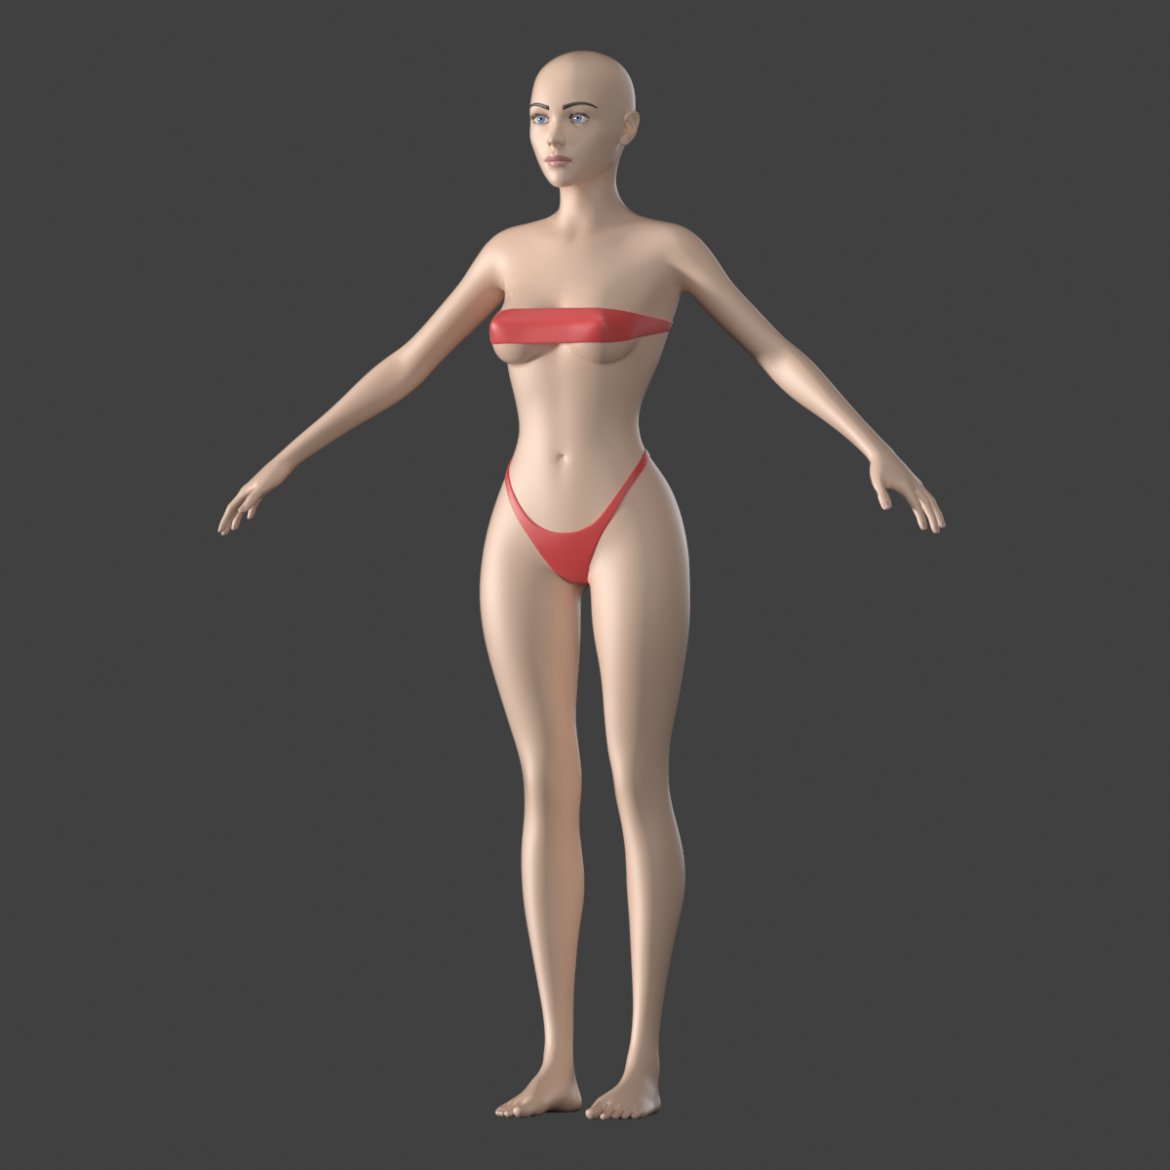  <a class="continue" href="https://www.flatpyramid.com/3d-models/characters-3d-models/human-types/female/stylized-female-01-a-pose-generic-mesh/">Continue Reading<span> Stylized Female 01 A-Pose Generic Mesh</span></a>